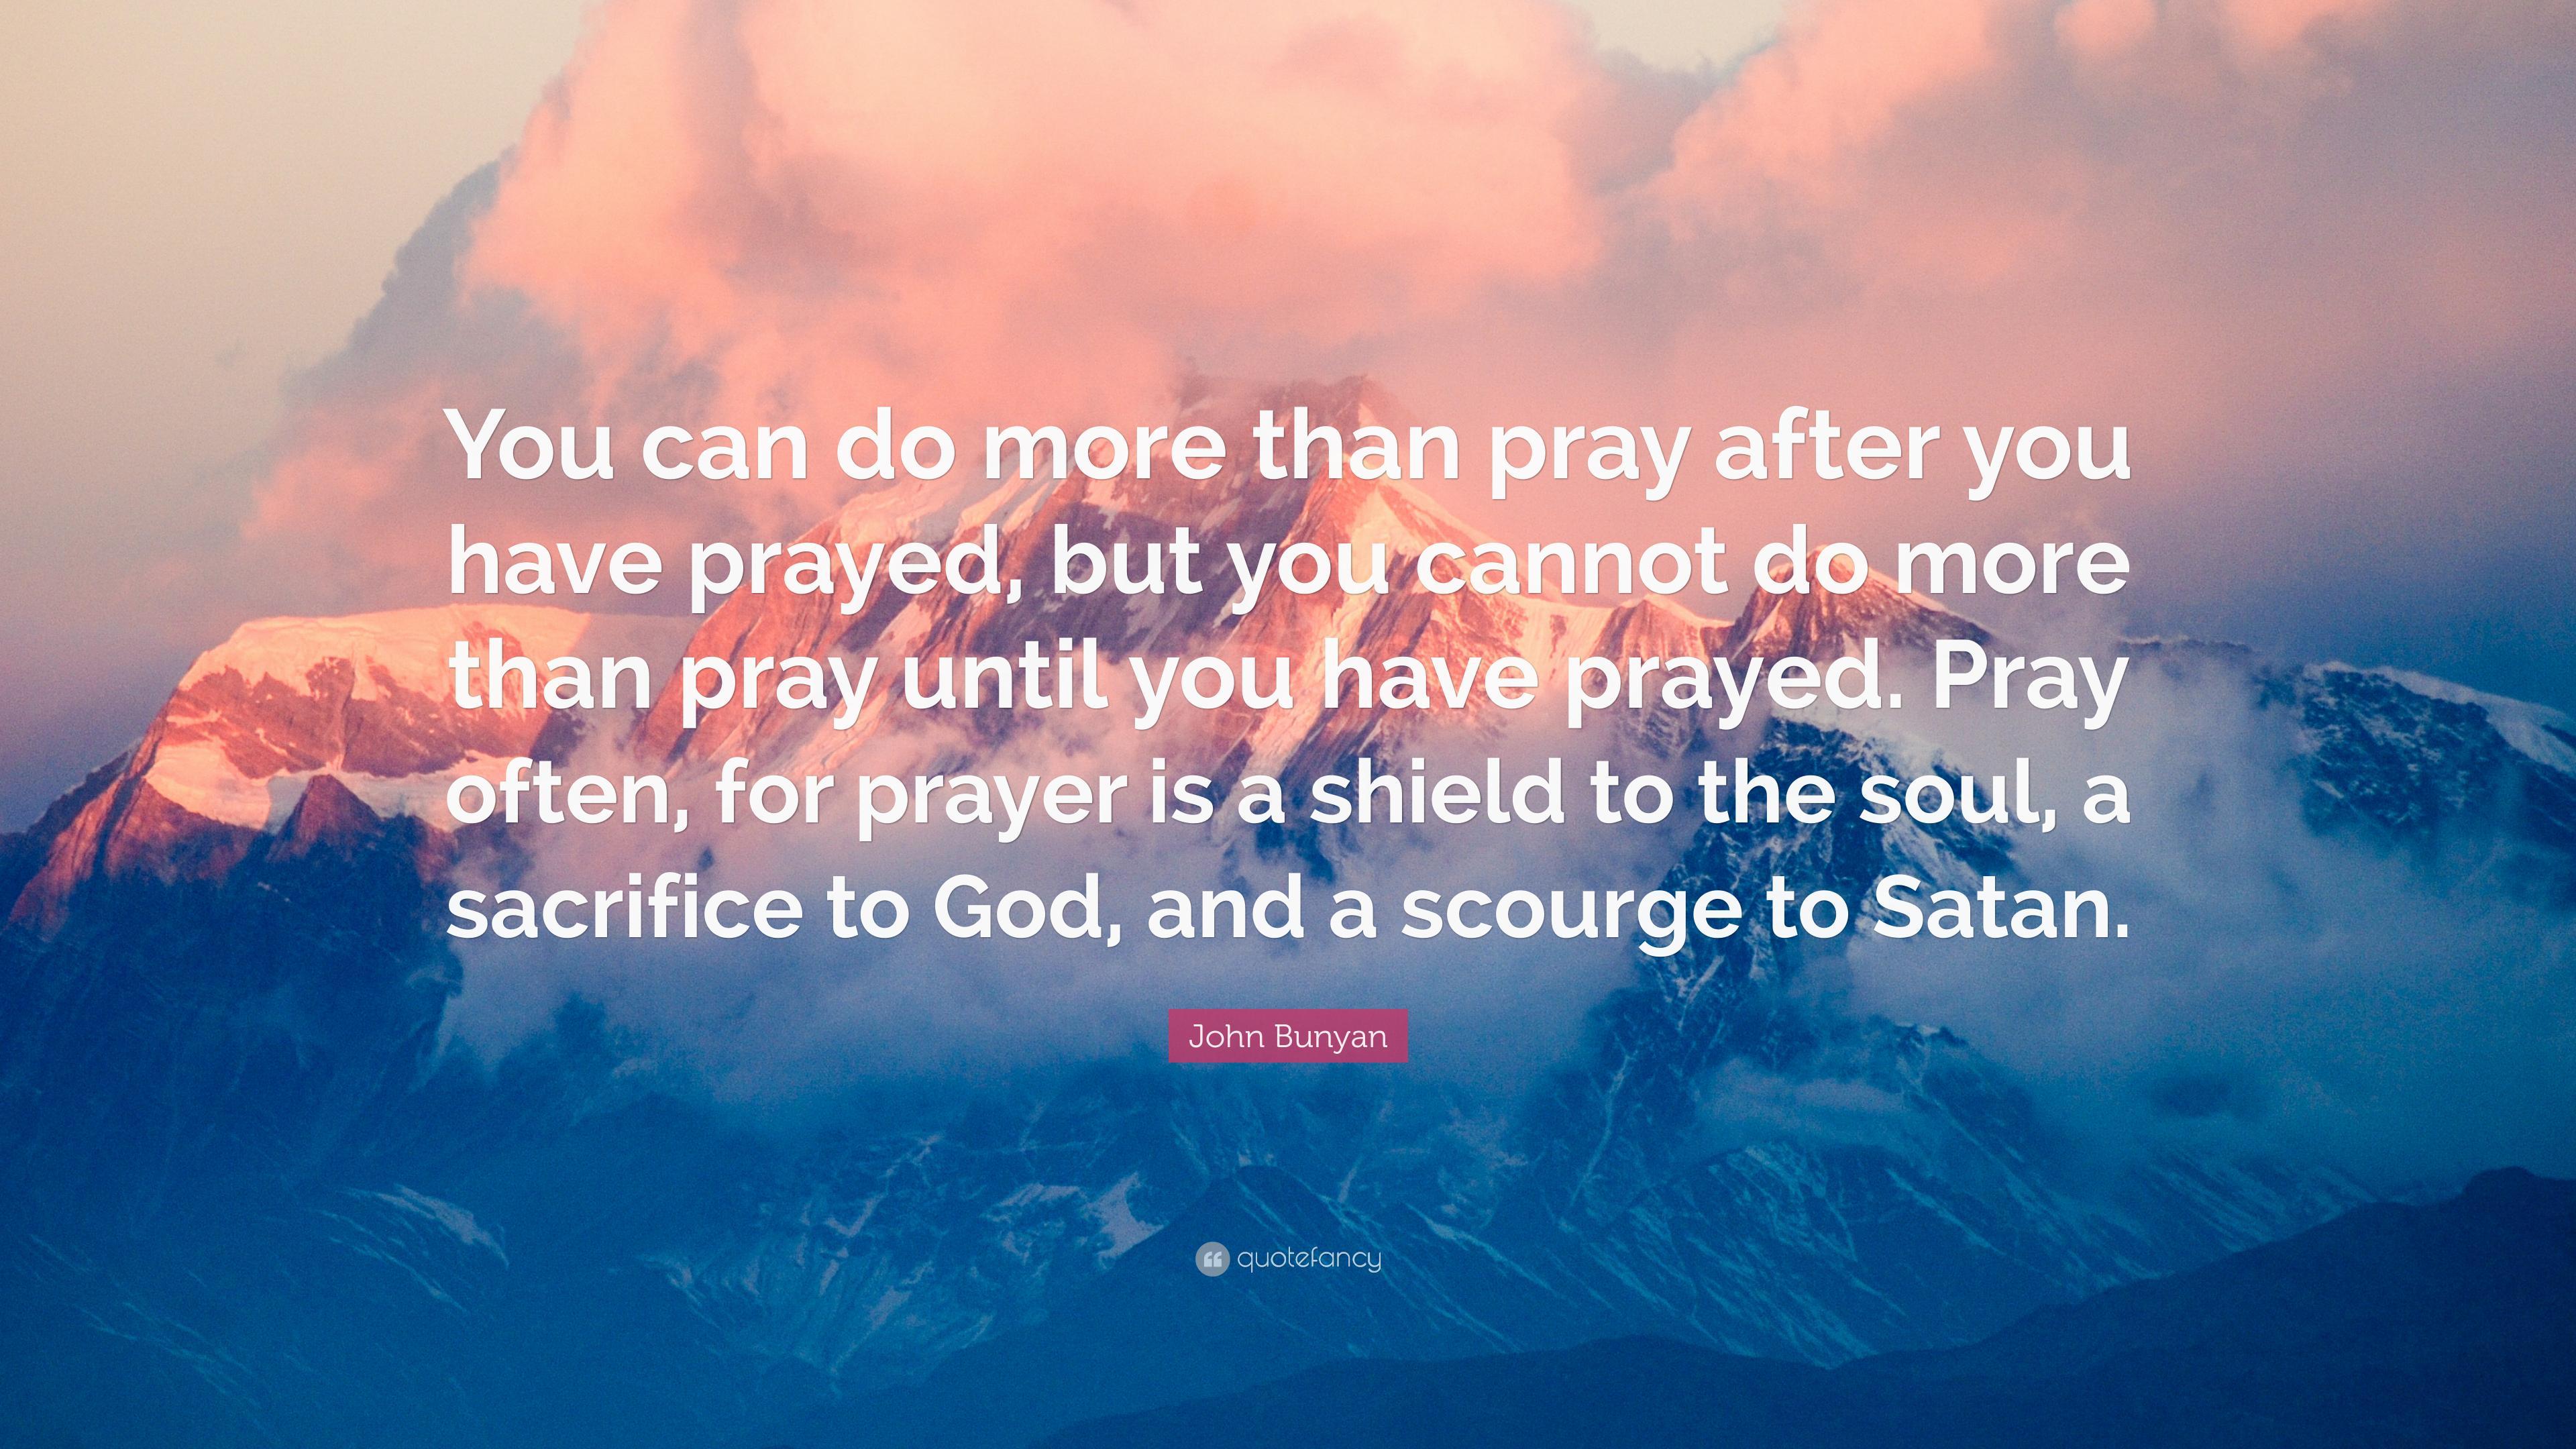 John Bunyan Quote: “You can do more than pray after you have prayed